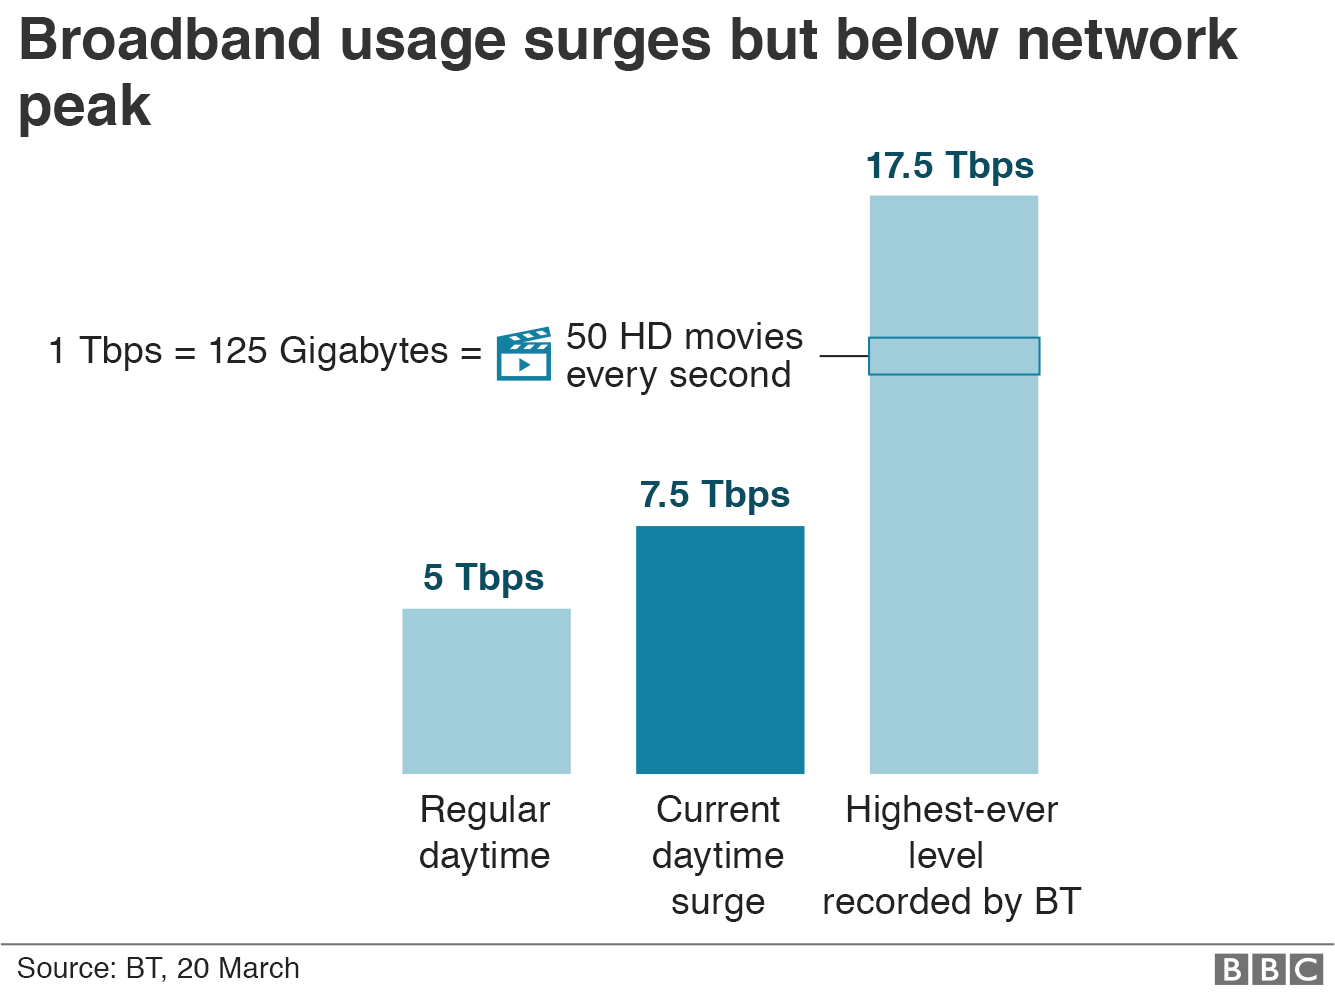 Graphic showing current data use is about 7.5 Tbps